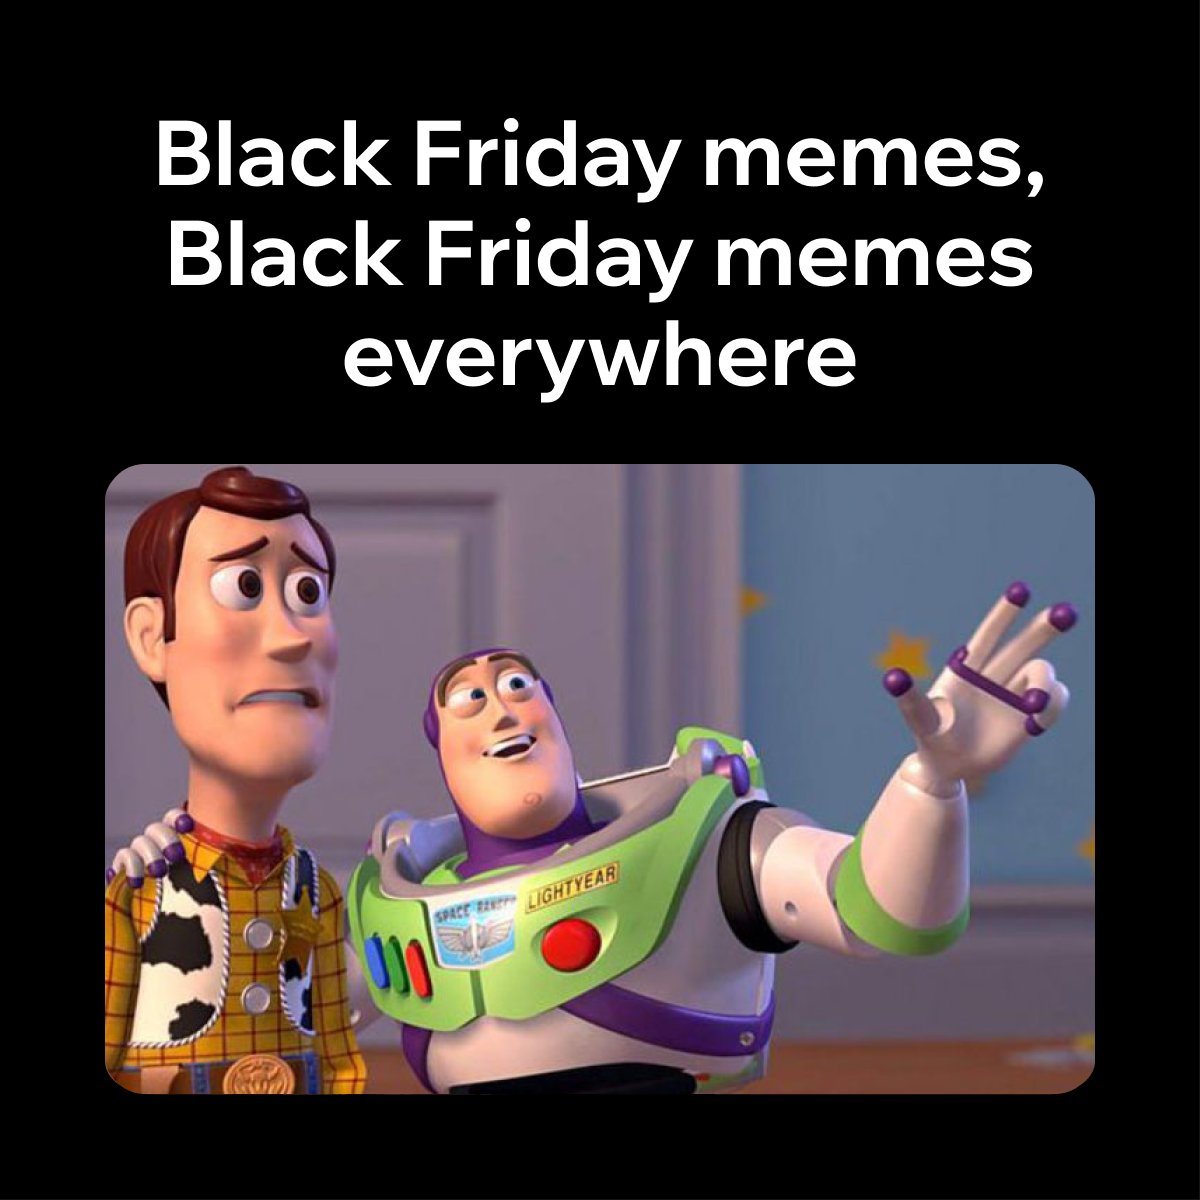 A smiling Buzz Lightyear standing next to a nervous looking Woody from Toy Story. Text above them on a black background reads: "Black Friday memes, Black Friday memes everywhere"